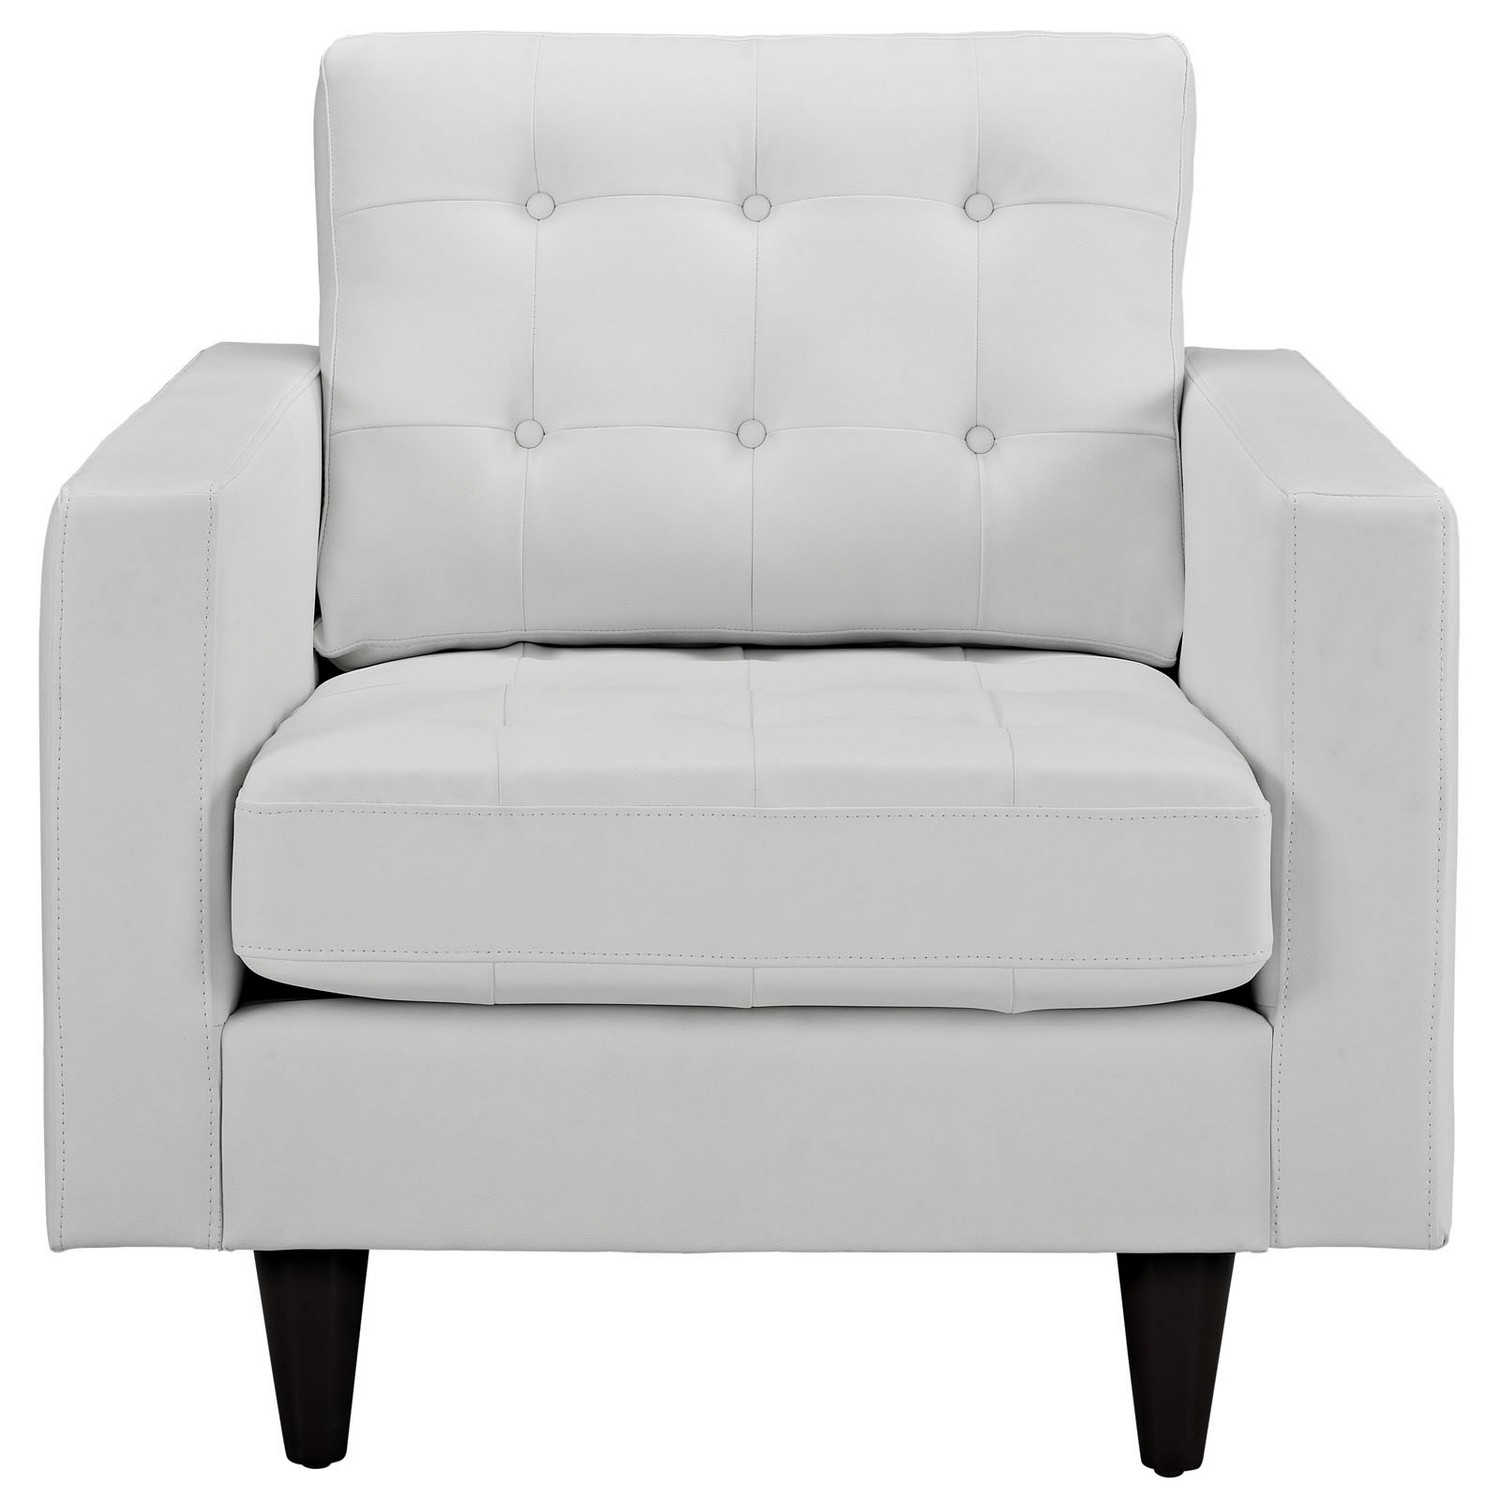 Modway Empress Leather Armchair - White